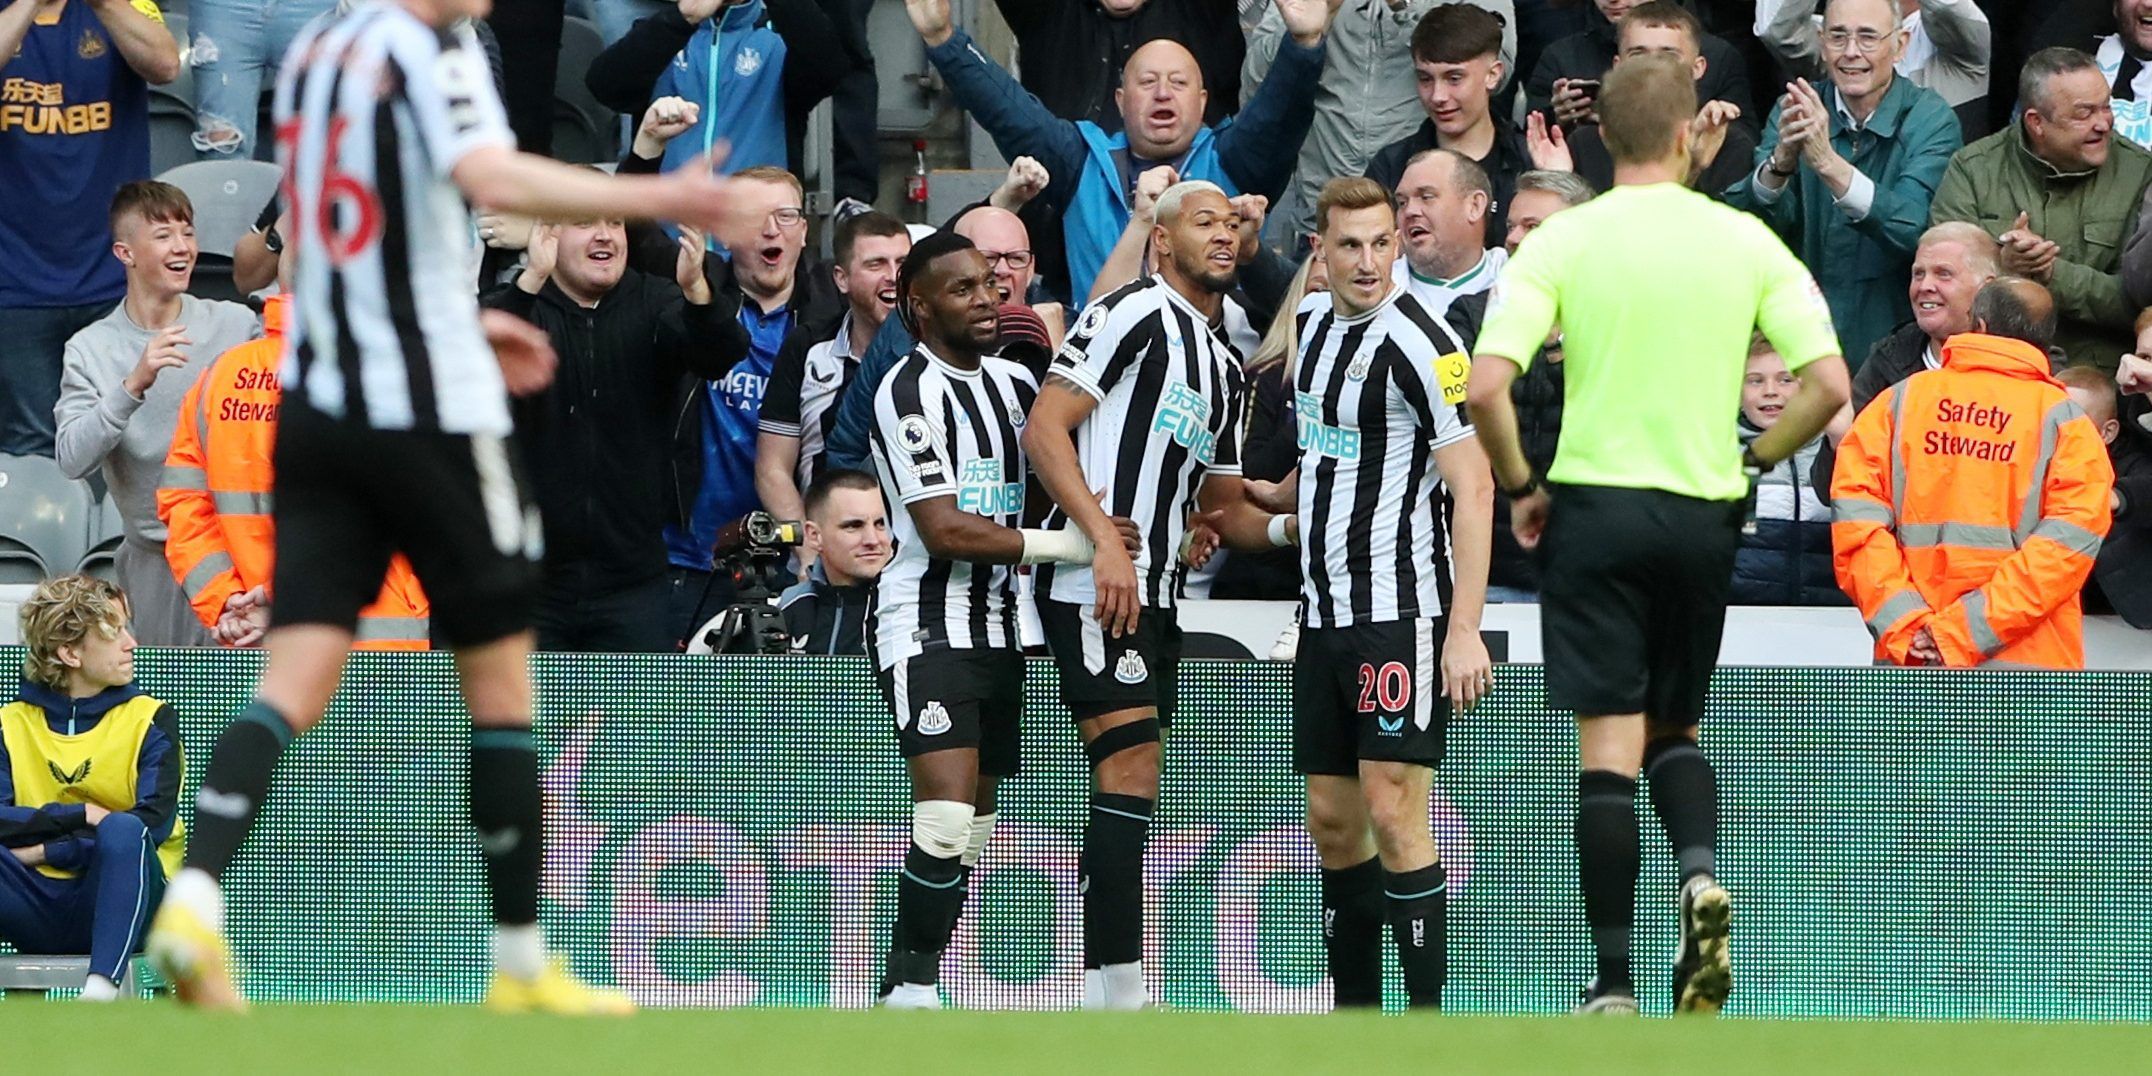 Soccer Football - Premier League - Newcastle United v Brentford - St James' Park, Newcastle, Britain - October 8, 2022 Newcastle United's Allan Saint-Maximin, Joelinton and Chris Wood celebrates their fifth goal, an own goal scored by Brentford's Ethan Pinnock REUTERS/Scott Heppell EDITORIAL USE ONLY. No use with unauthorized audio, video, data, fixture lists, club/league logos or 'live' services. Online in-match use limited to 75 images, no video emulation. No use in betting, games or single cl